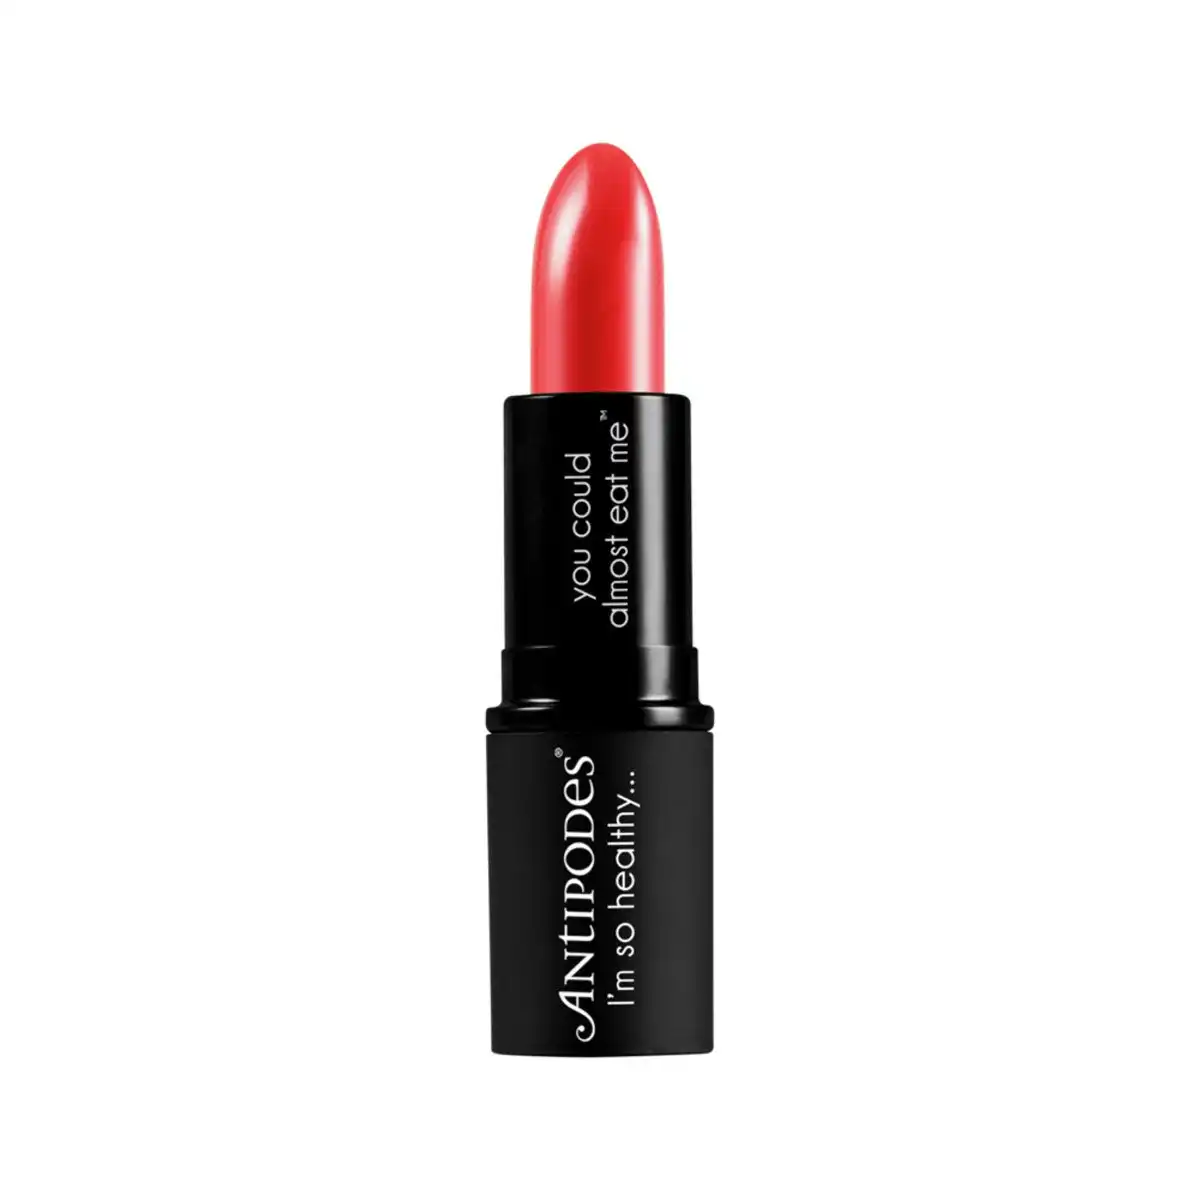 Antipodes Moisture-Boost Natural Lipstick South Pacific Coral 4g